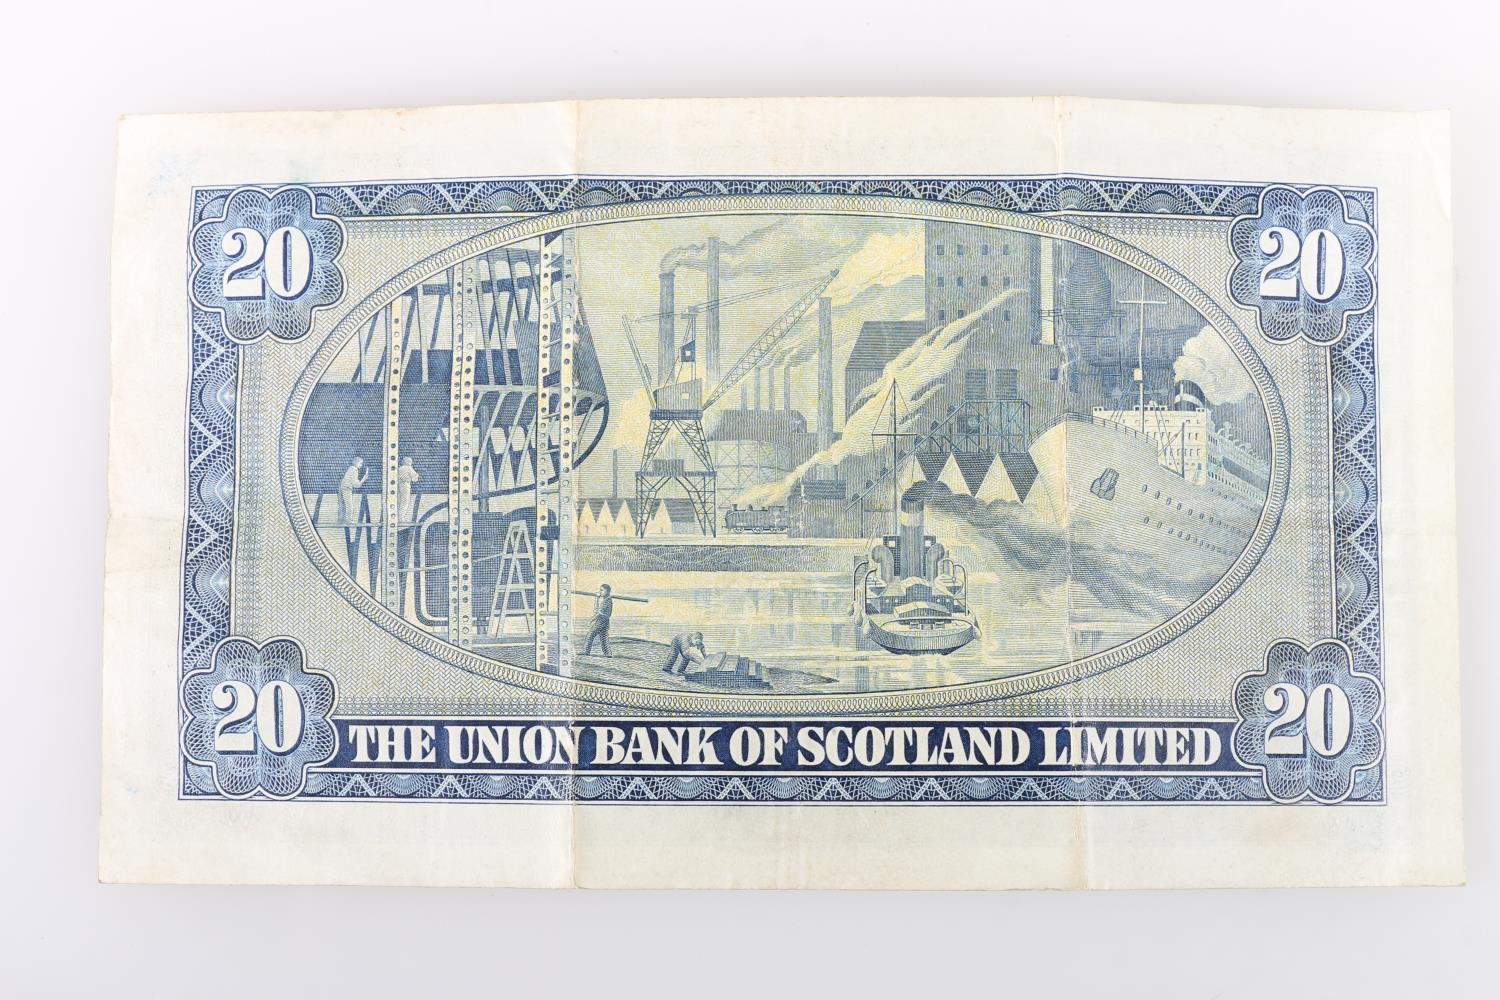 THE UNION BANK OF SCOTLAND LIMITED twenty pound £20 banknote 19th June 1951 J A Morrison A087/063 - Image 2 of 2